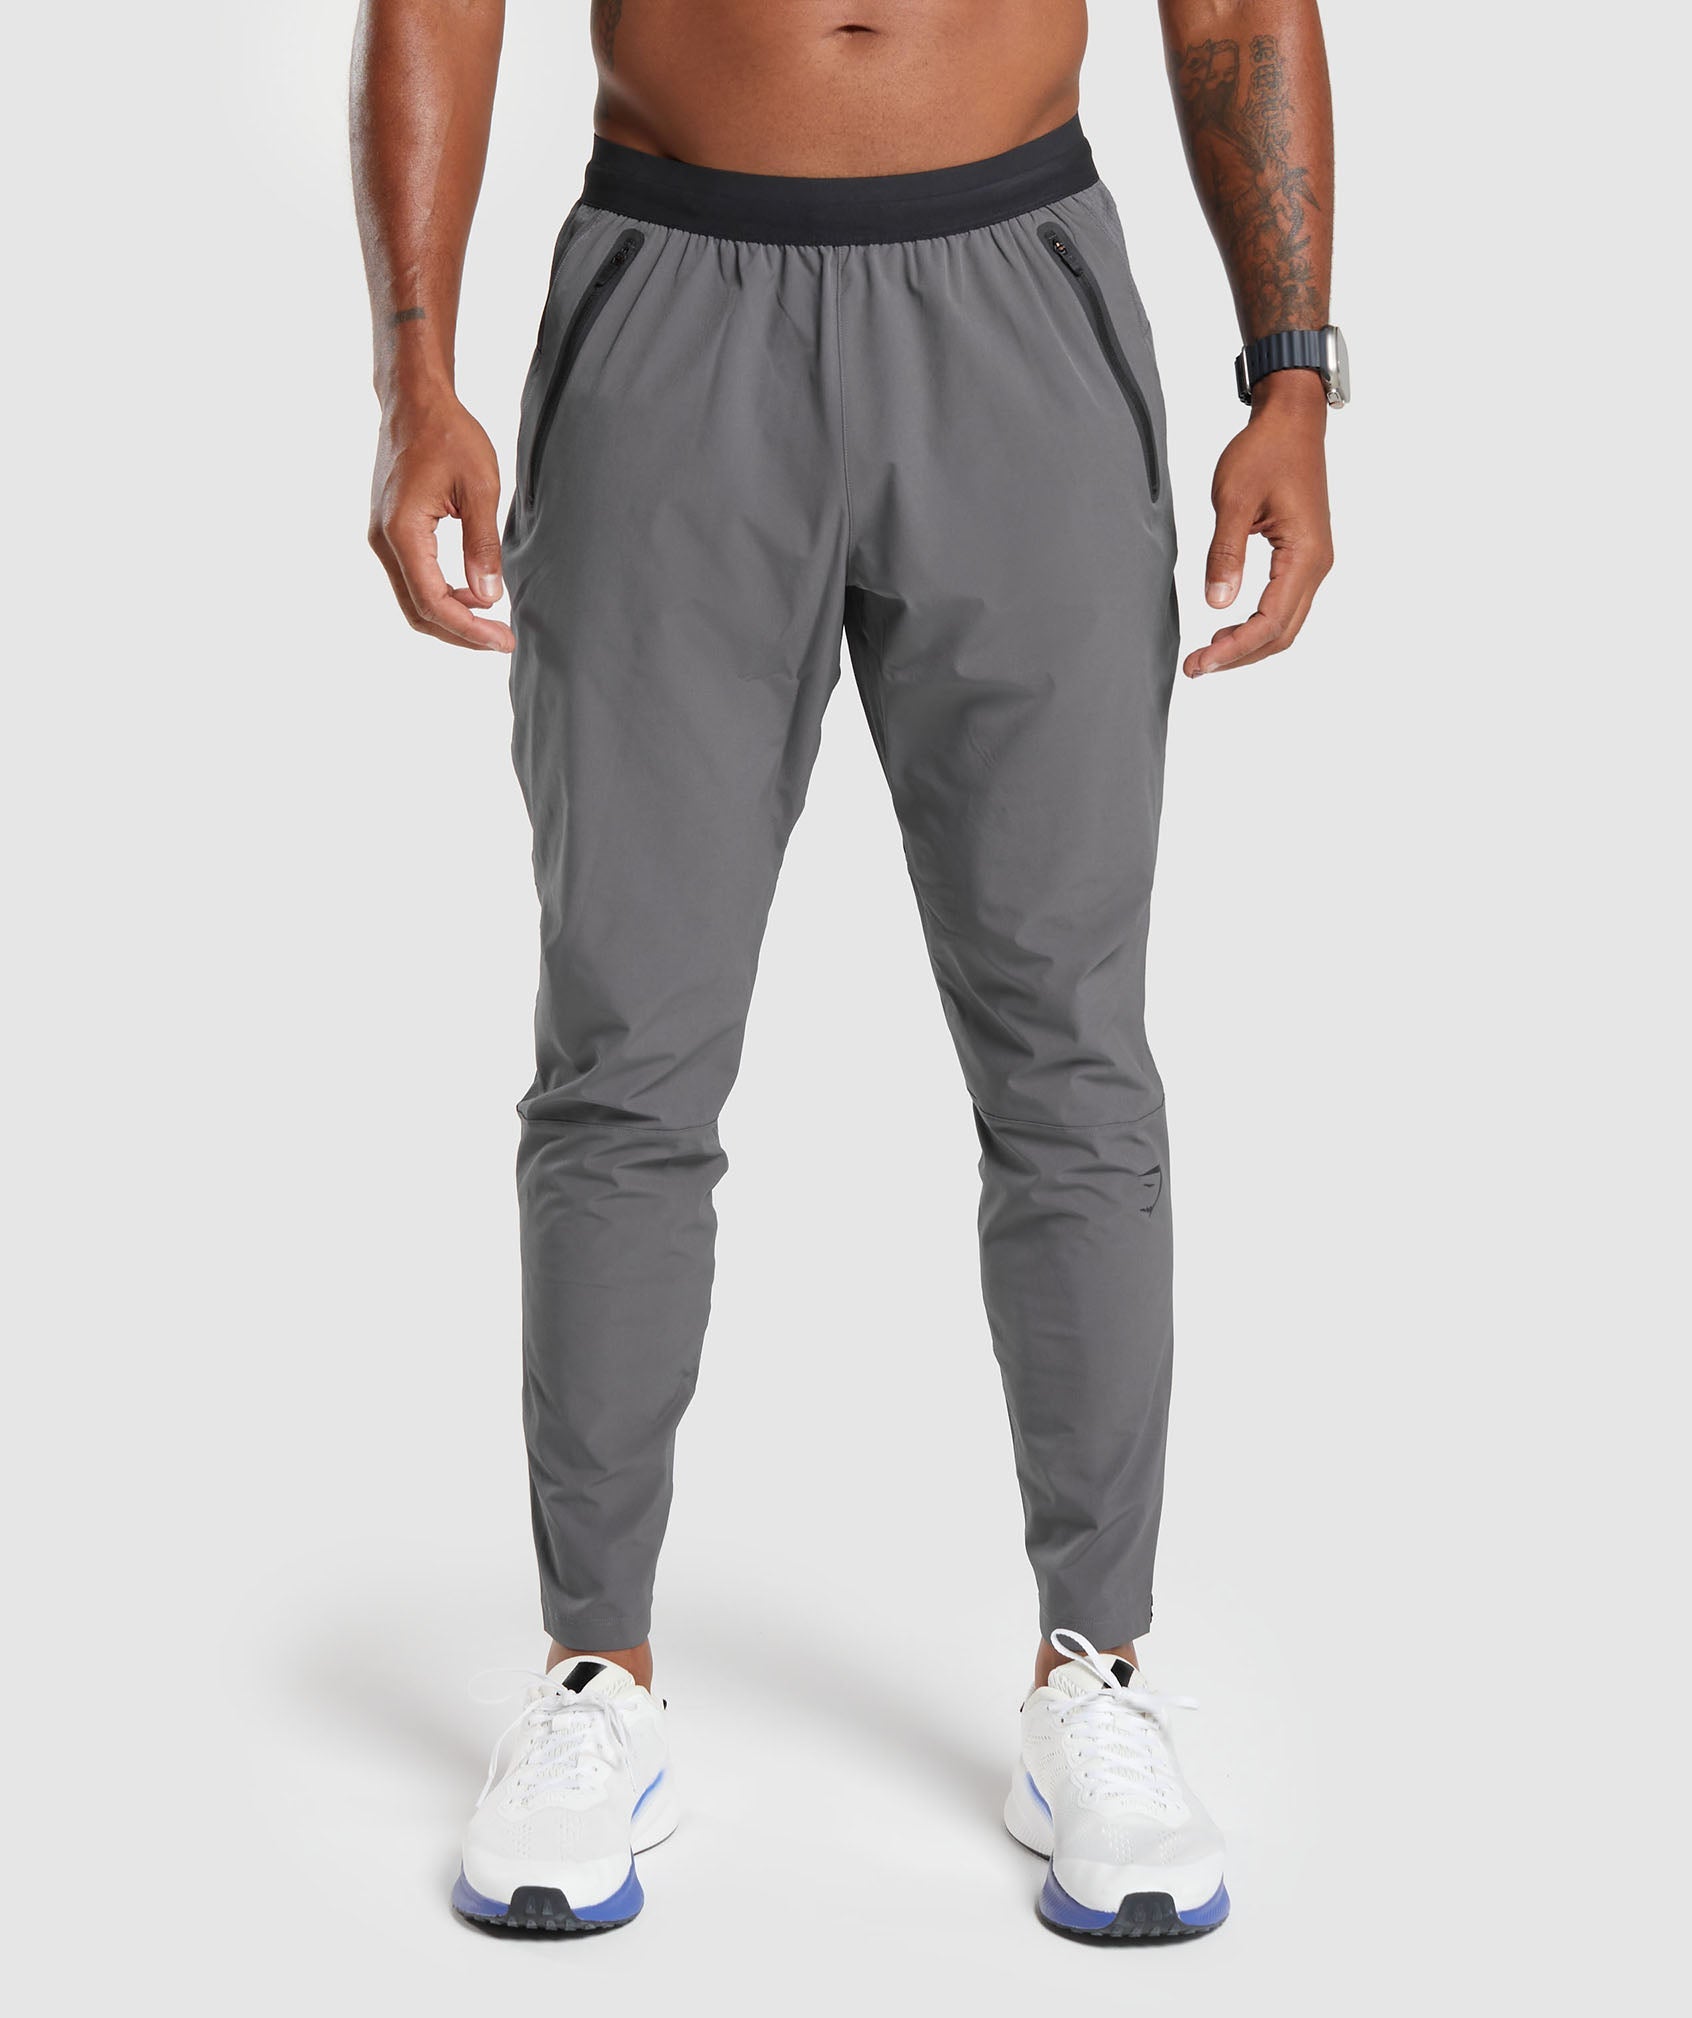 Hybrid Woven Joggers in Silhouette Grey is out of stock